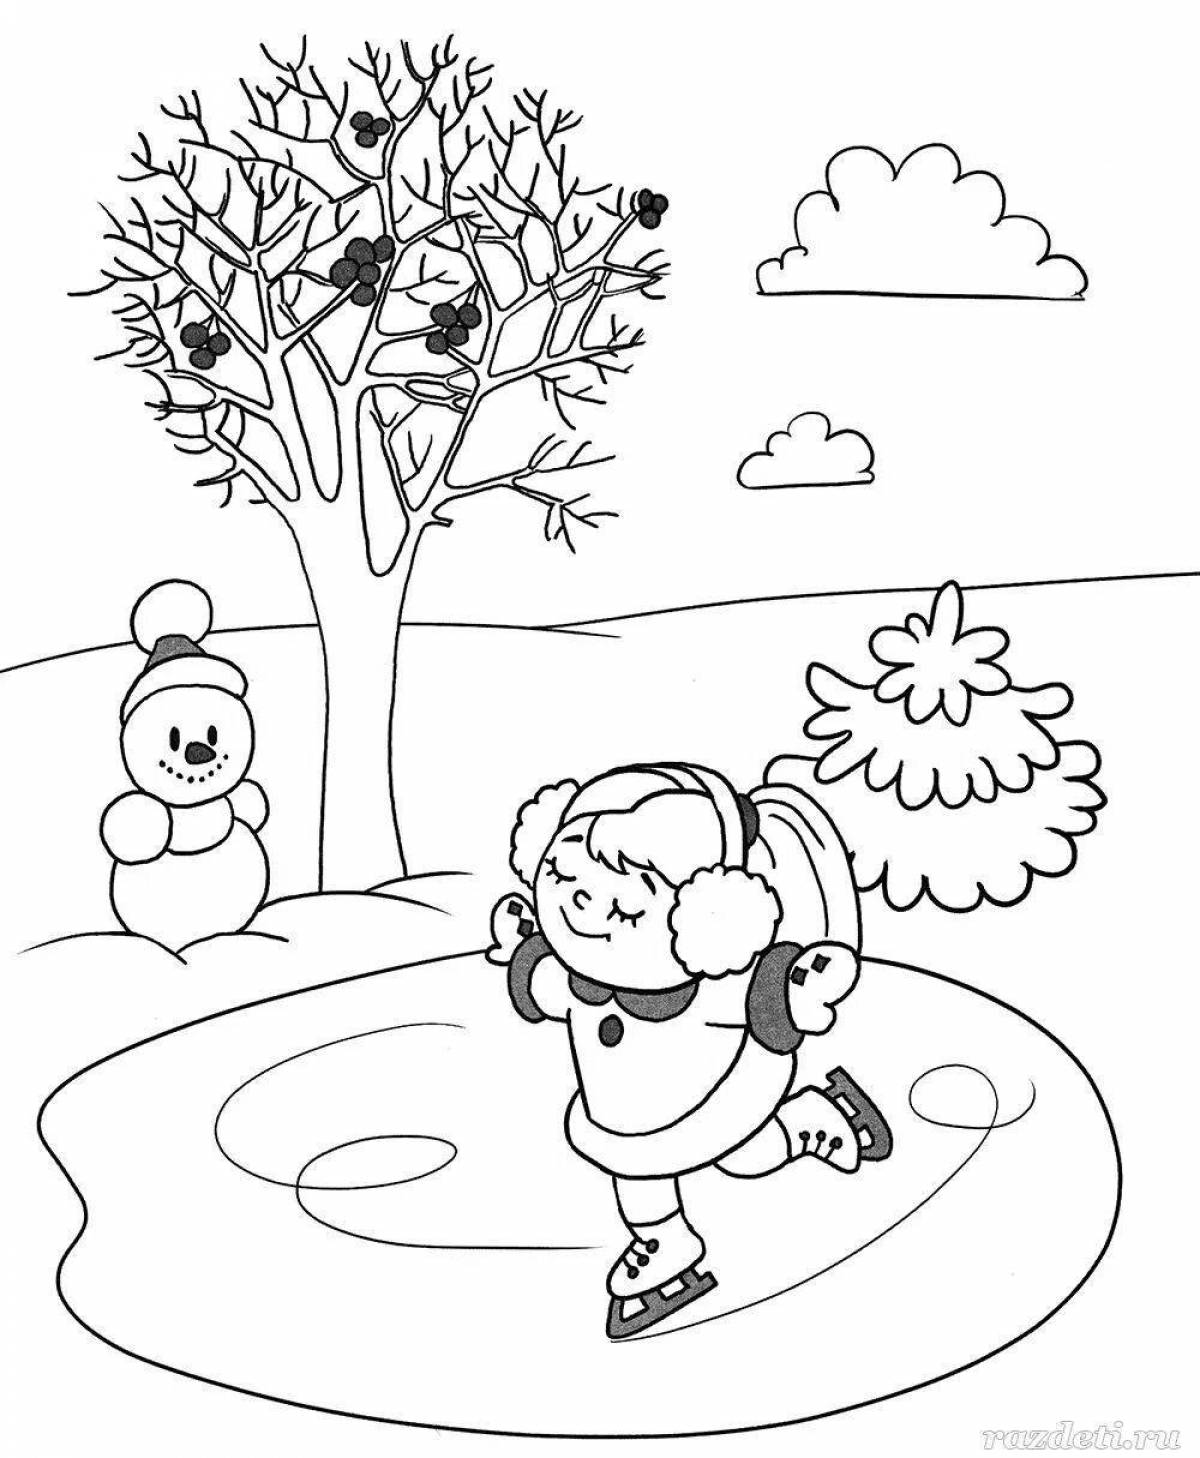 Adorable 5 year old winter coloring book